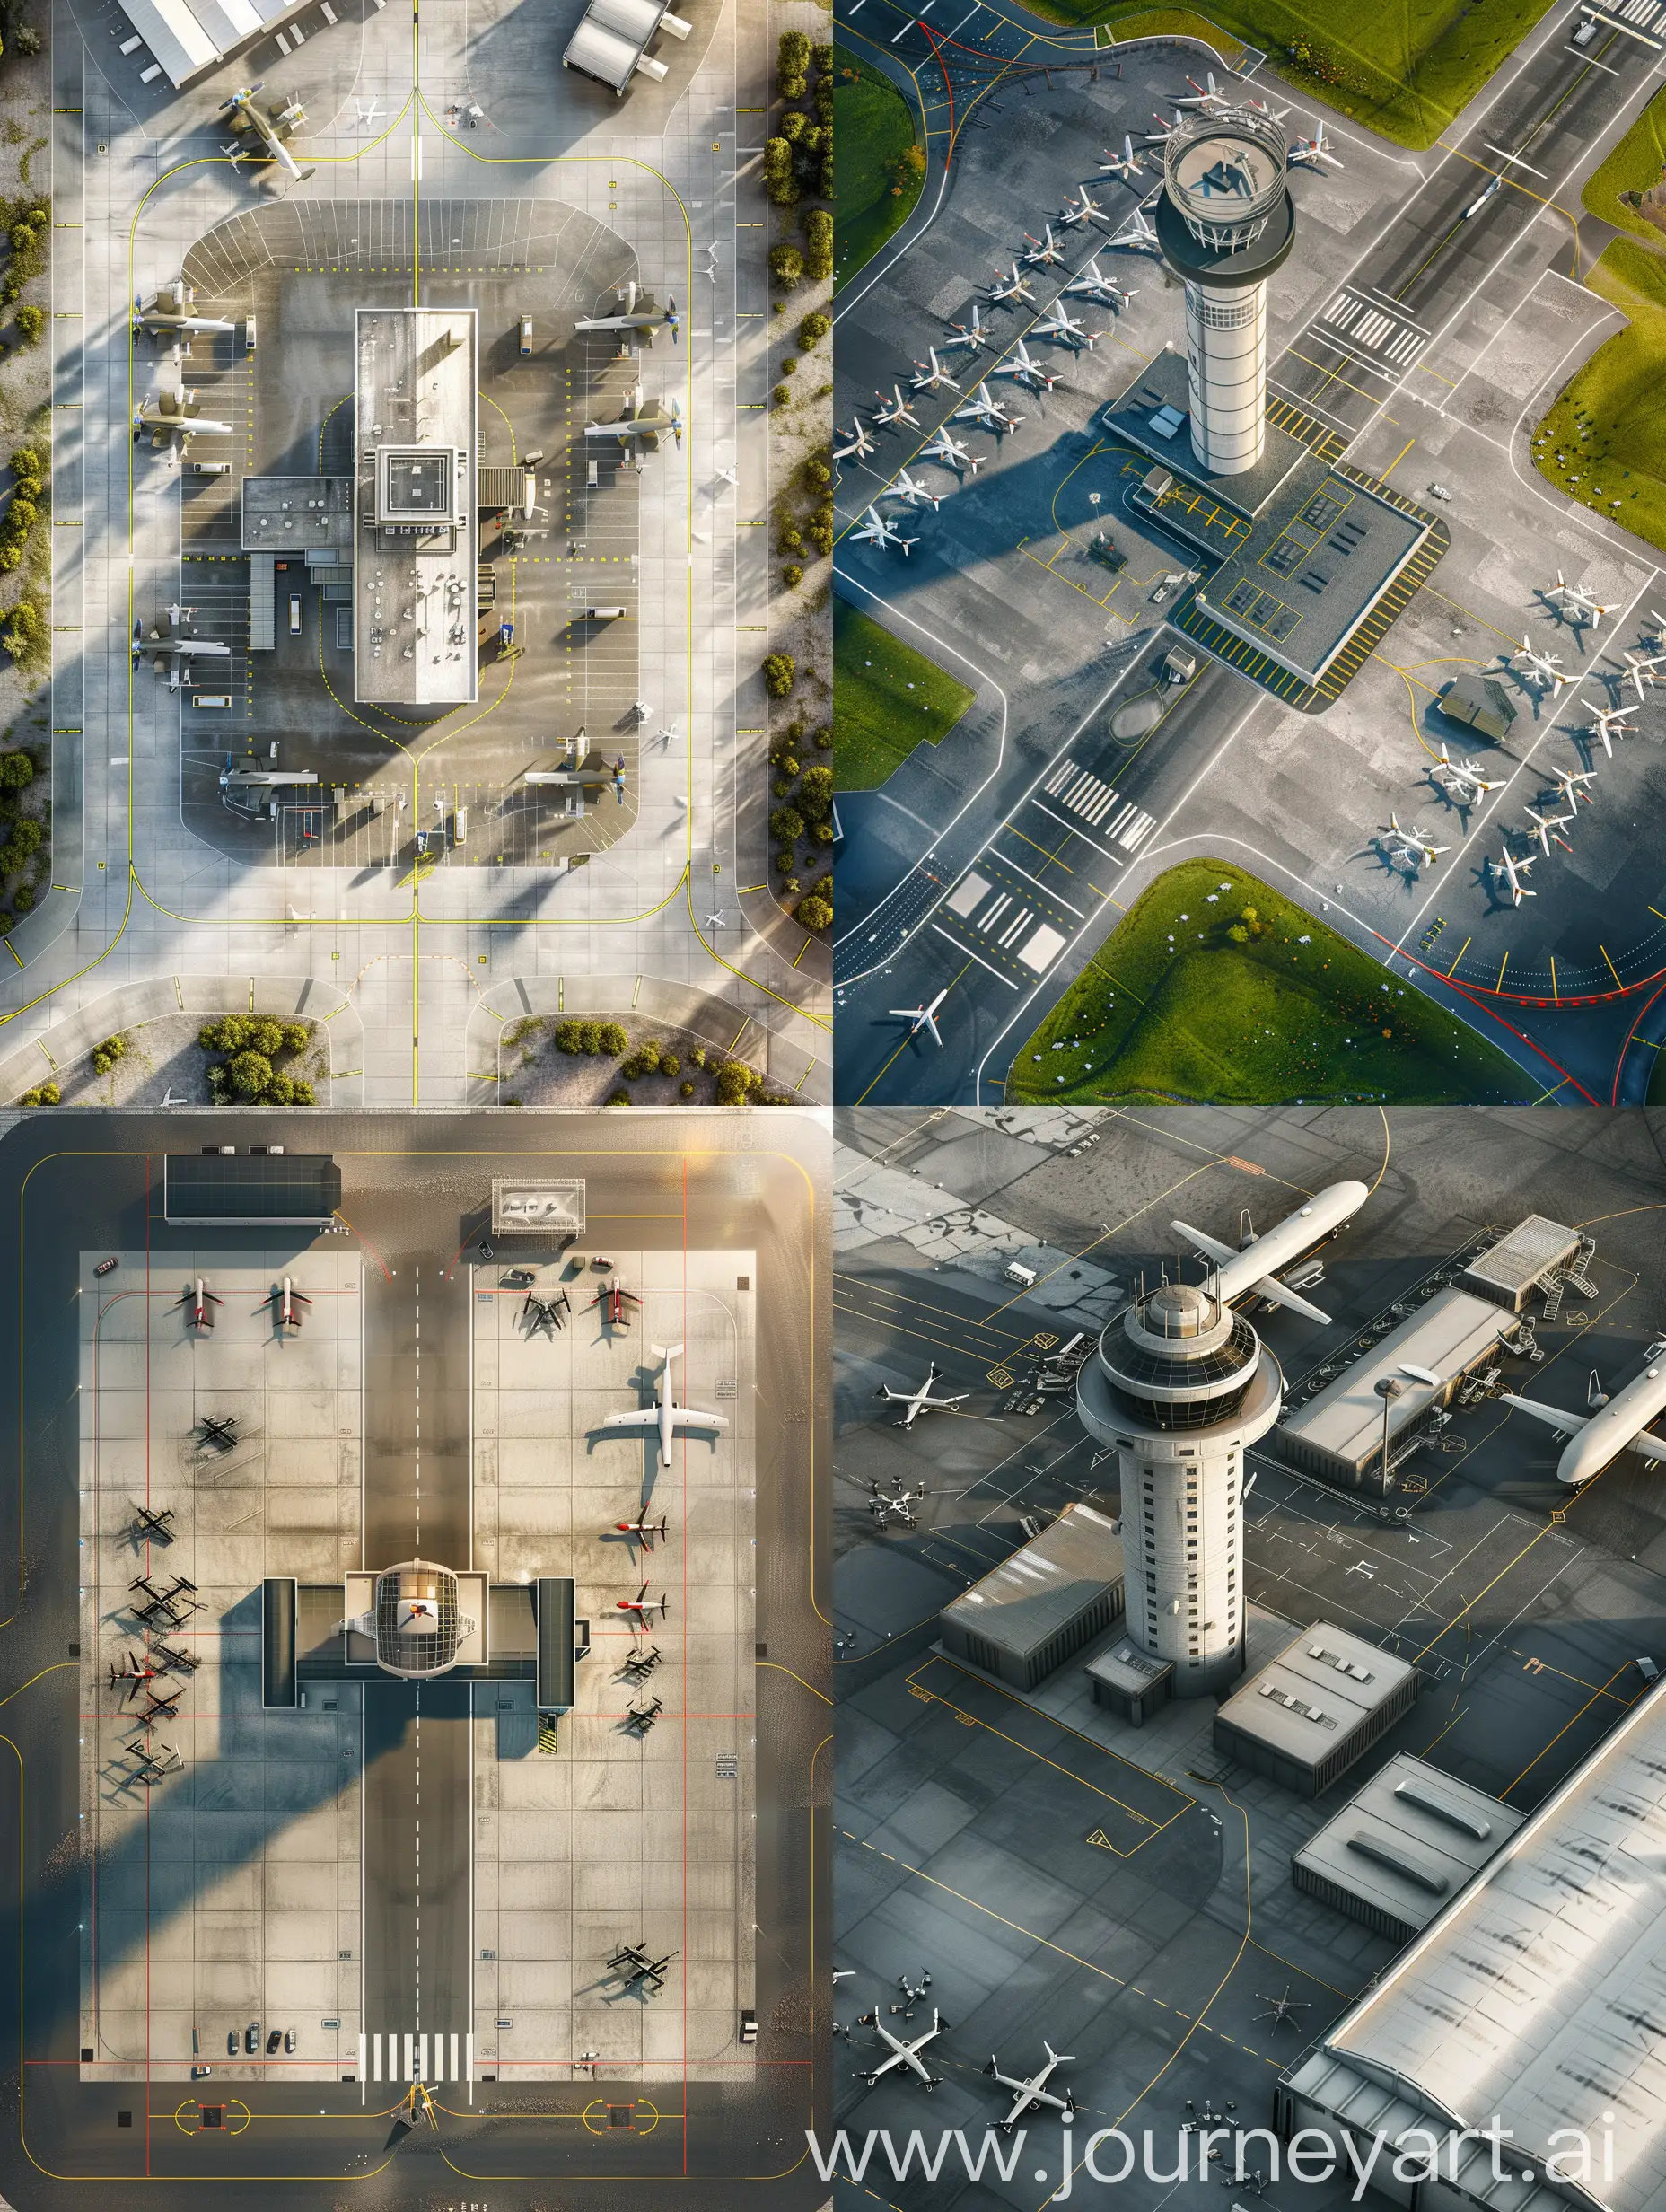 Airport-Drone-Park-Tower-Hangars-and-Runway-Aerial-View